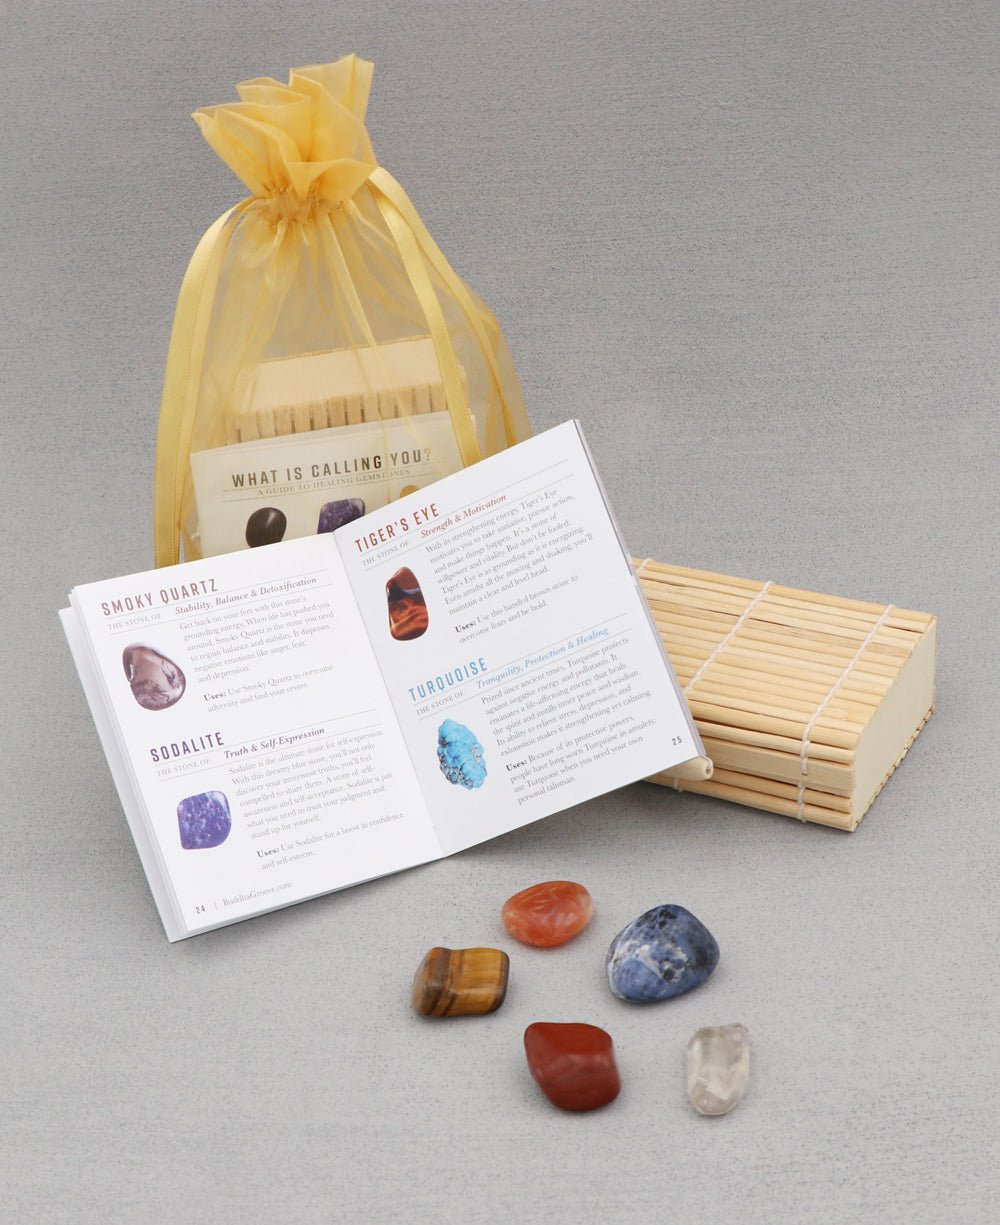 Healing Gemstone Set for Strength and Confidence - Home & Garden